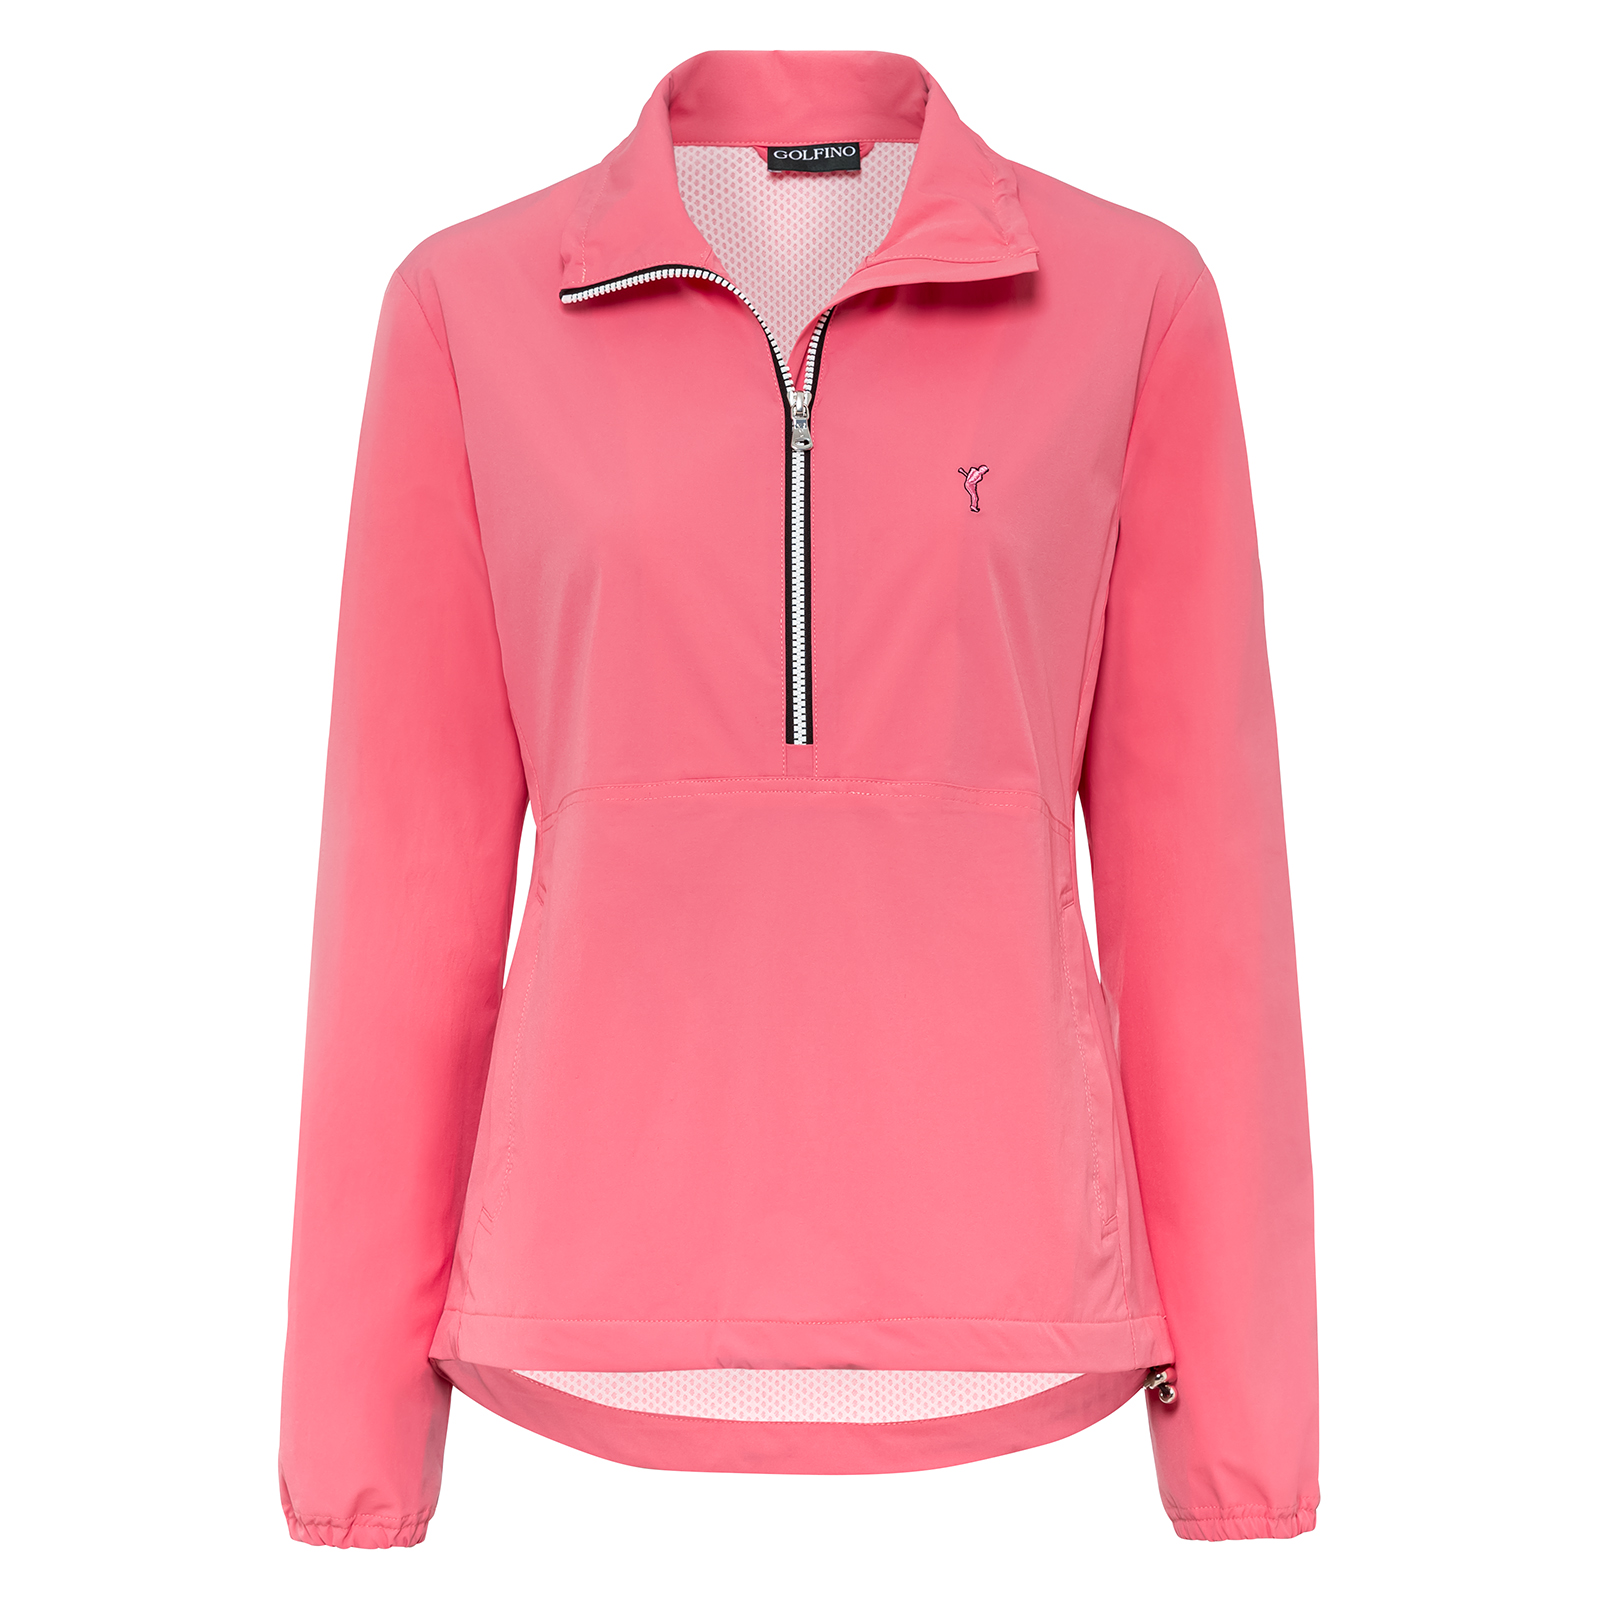 Ladies’ water-repellent, slip-on golf windcheater jacket with stretch component